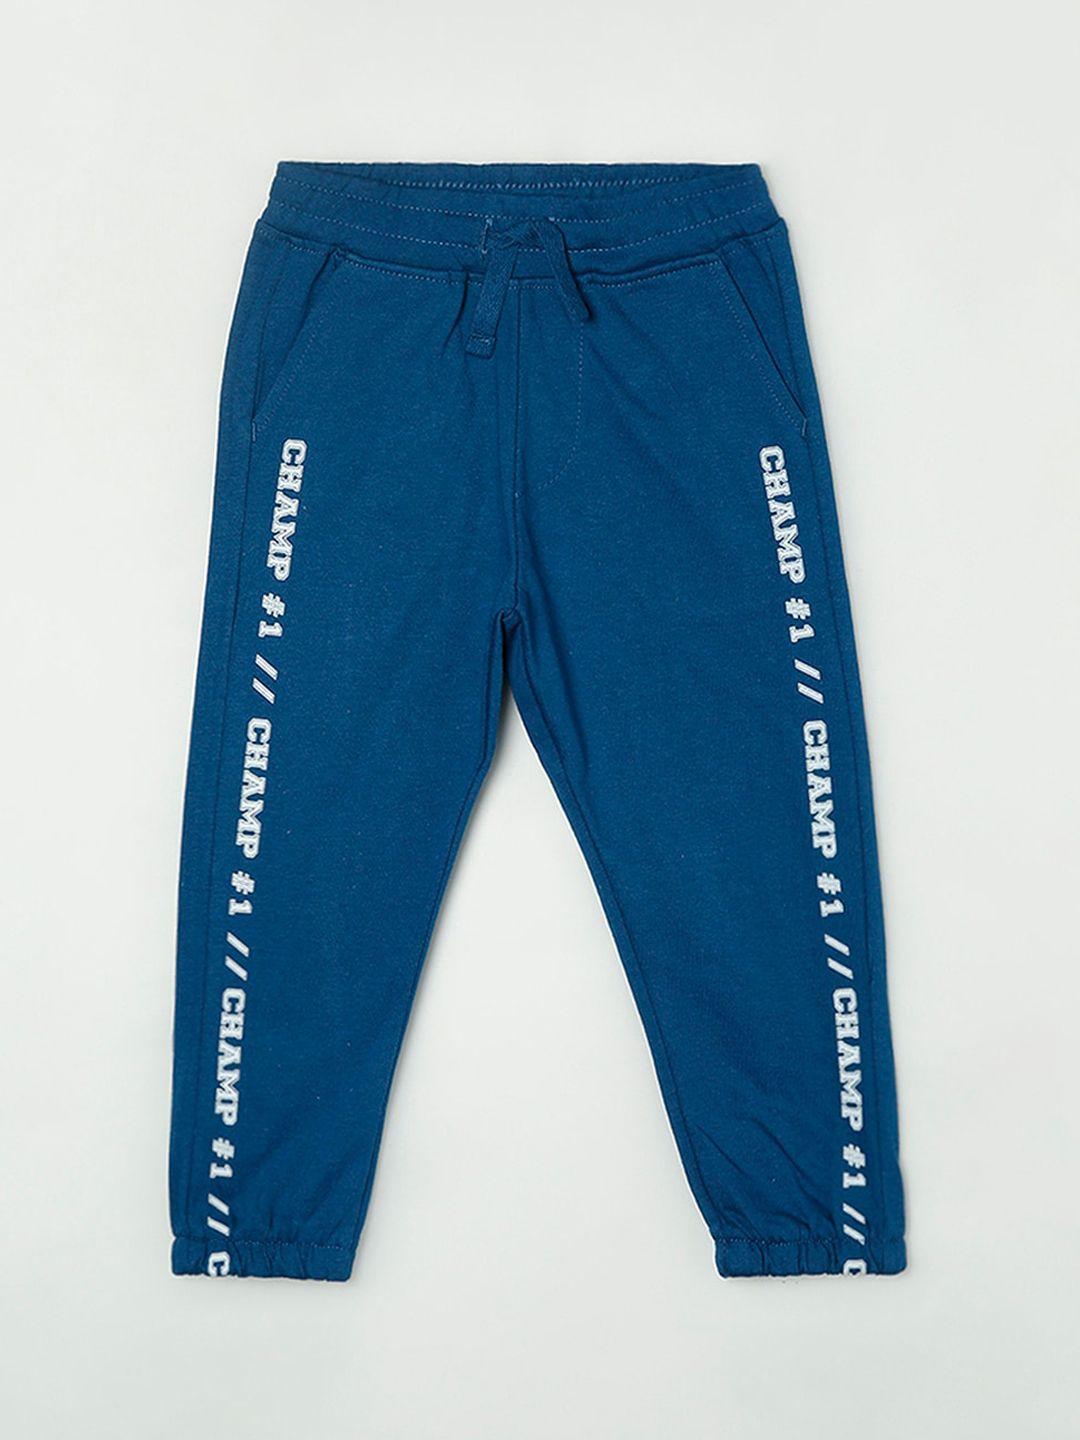 juniors-by-lifestyle-boys-blue-printed-cotton-joggers